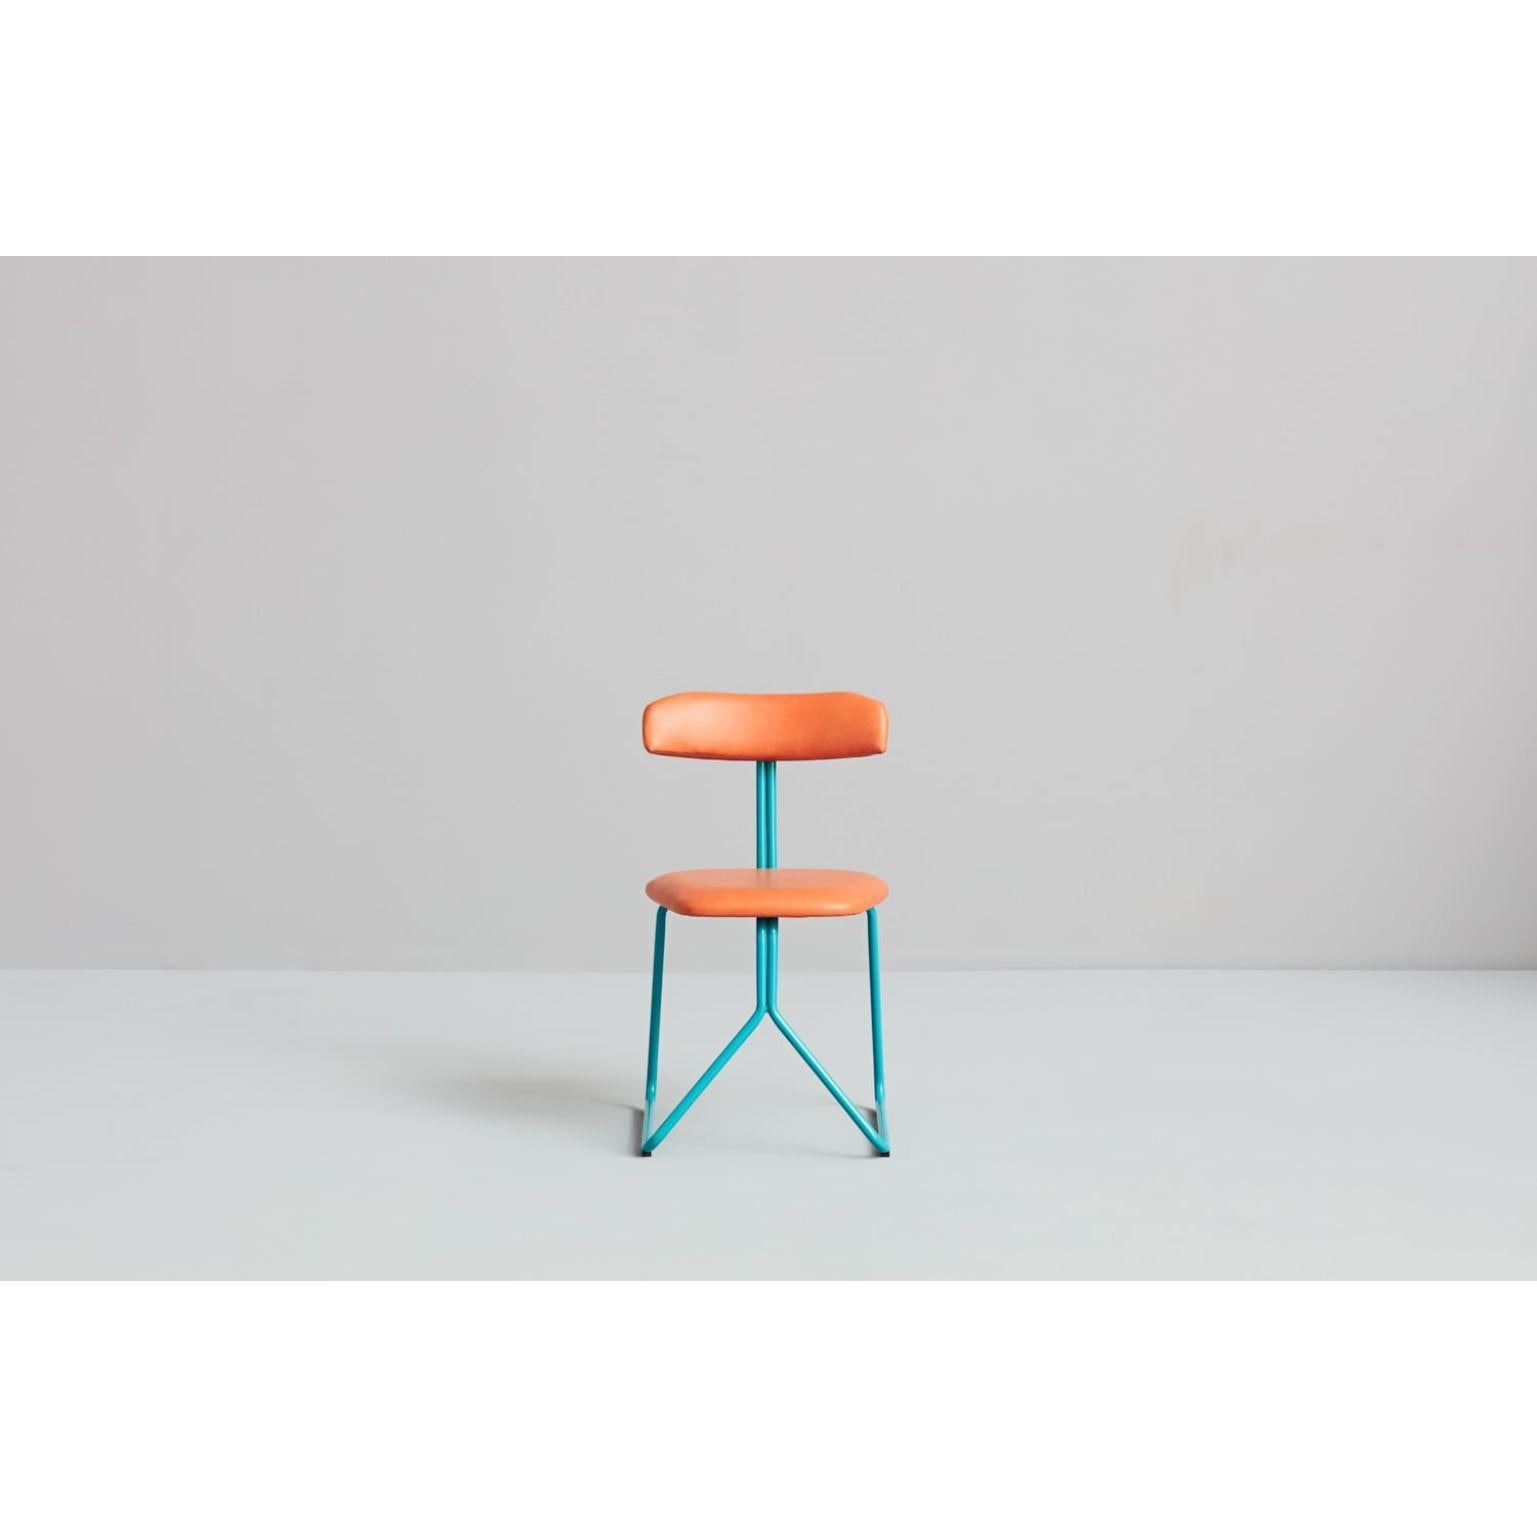 A Set of Rider Stool & Chair by Pavel Vetrov 1